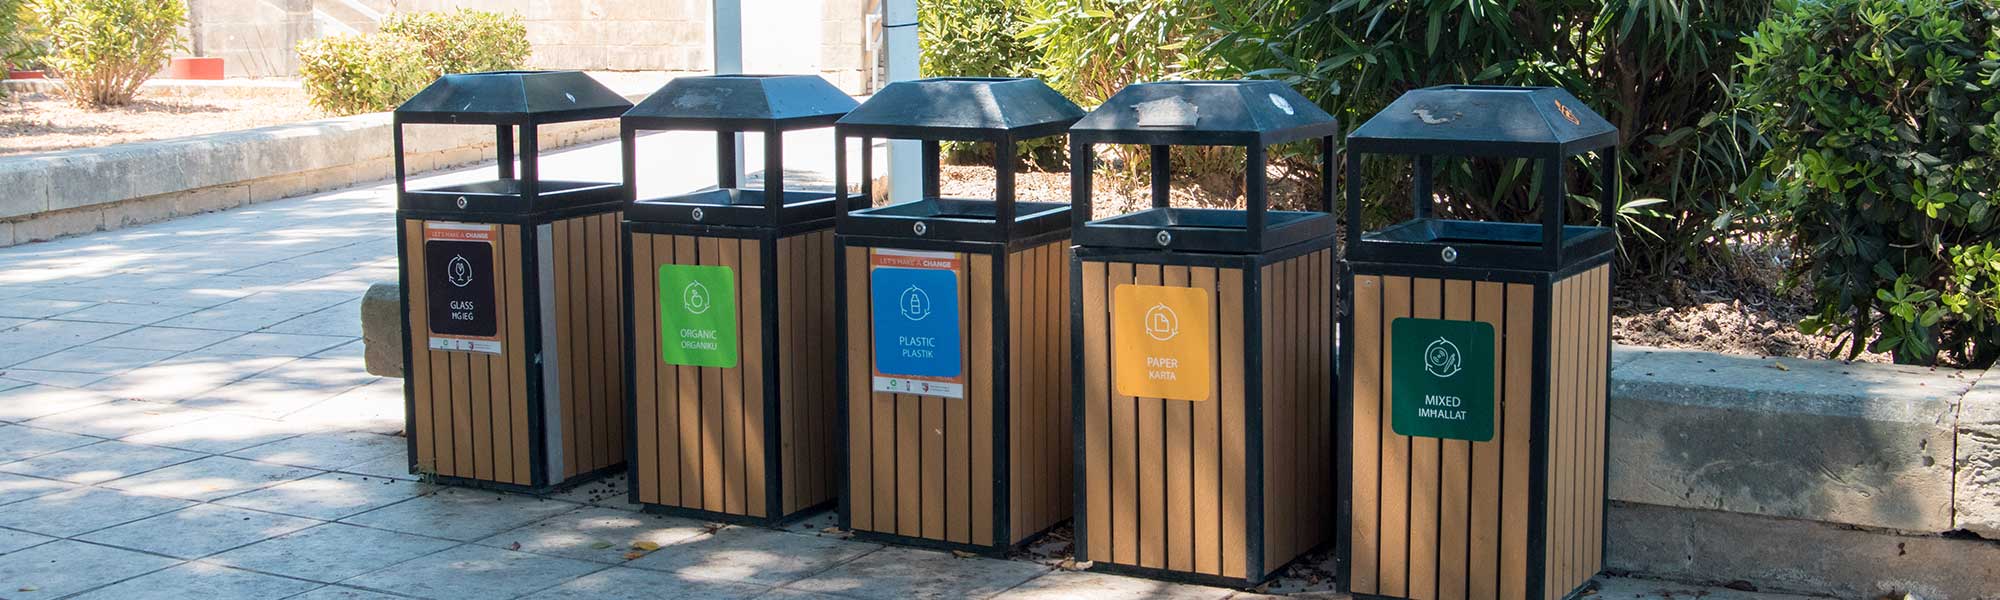 5 different types of bins for various materials (glass, organic, plastic, paper and mixed)